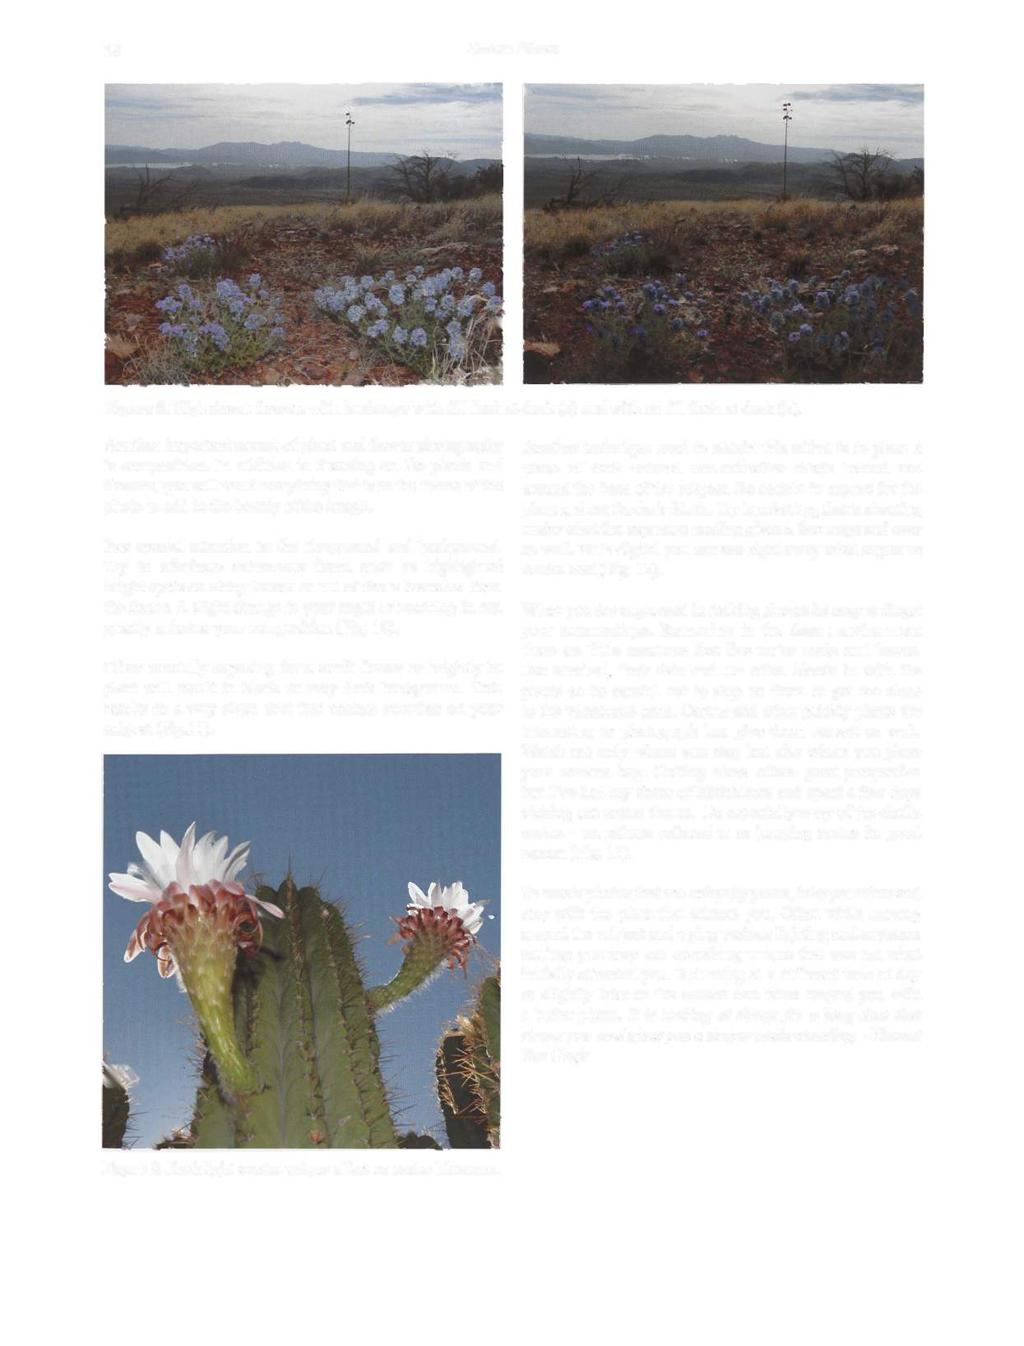 38 Desert Plants Figure 8. High desert flowers with landscape with fill flash at dusk (a) and with no fill flash at dusk (b). Another important aspect of plant and flower photography is composition.